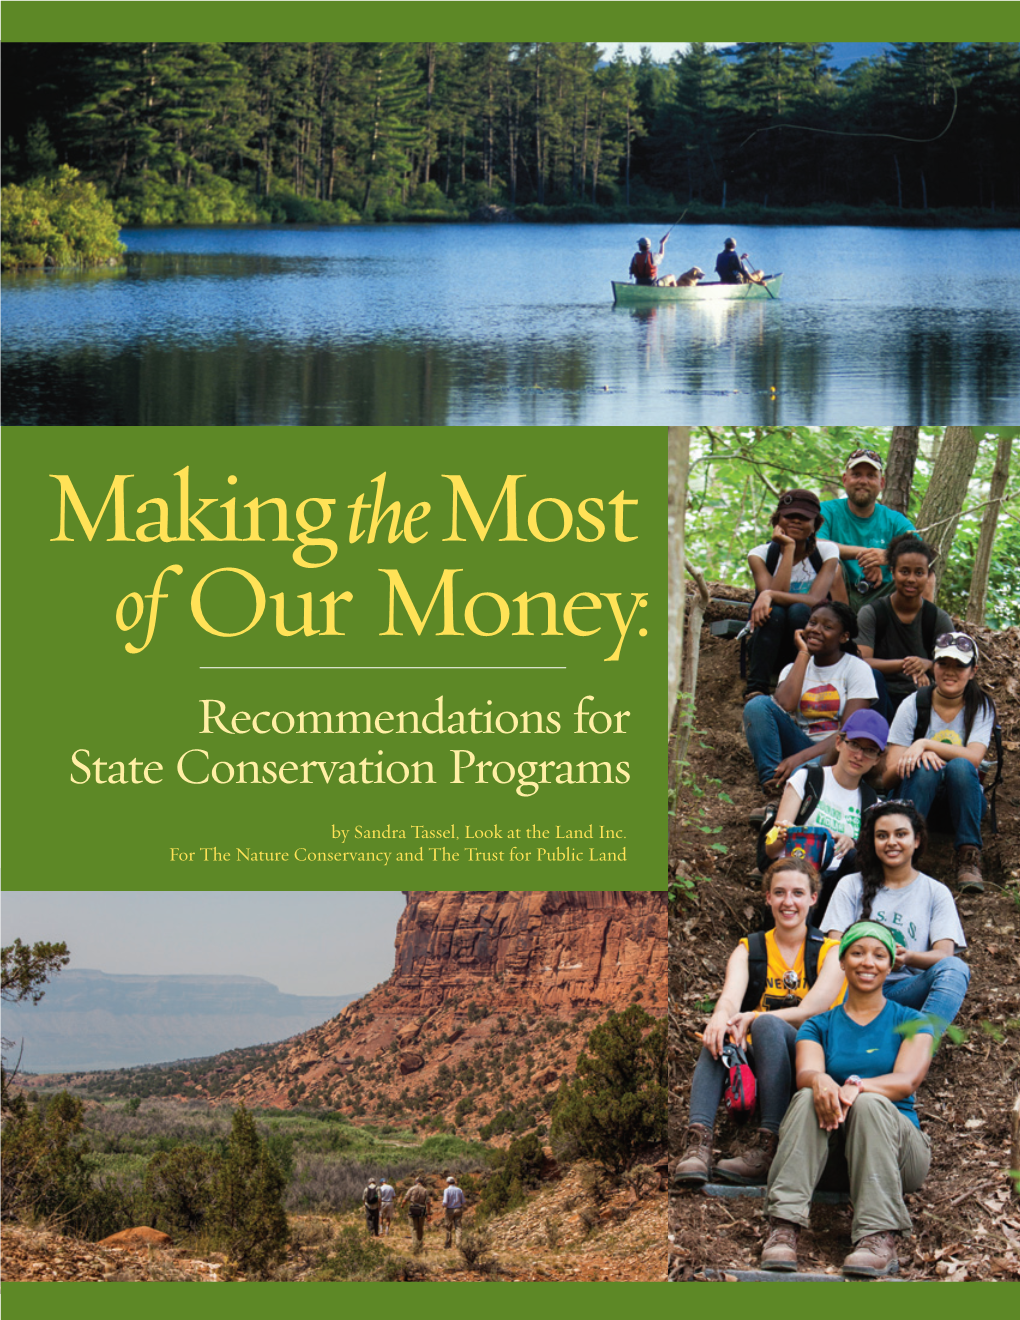 Recommendations for State Conservation Programs